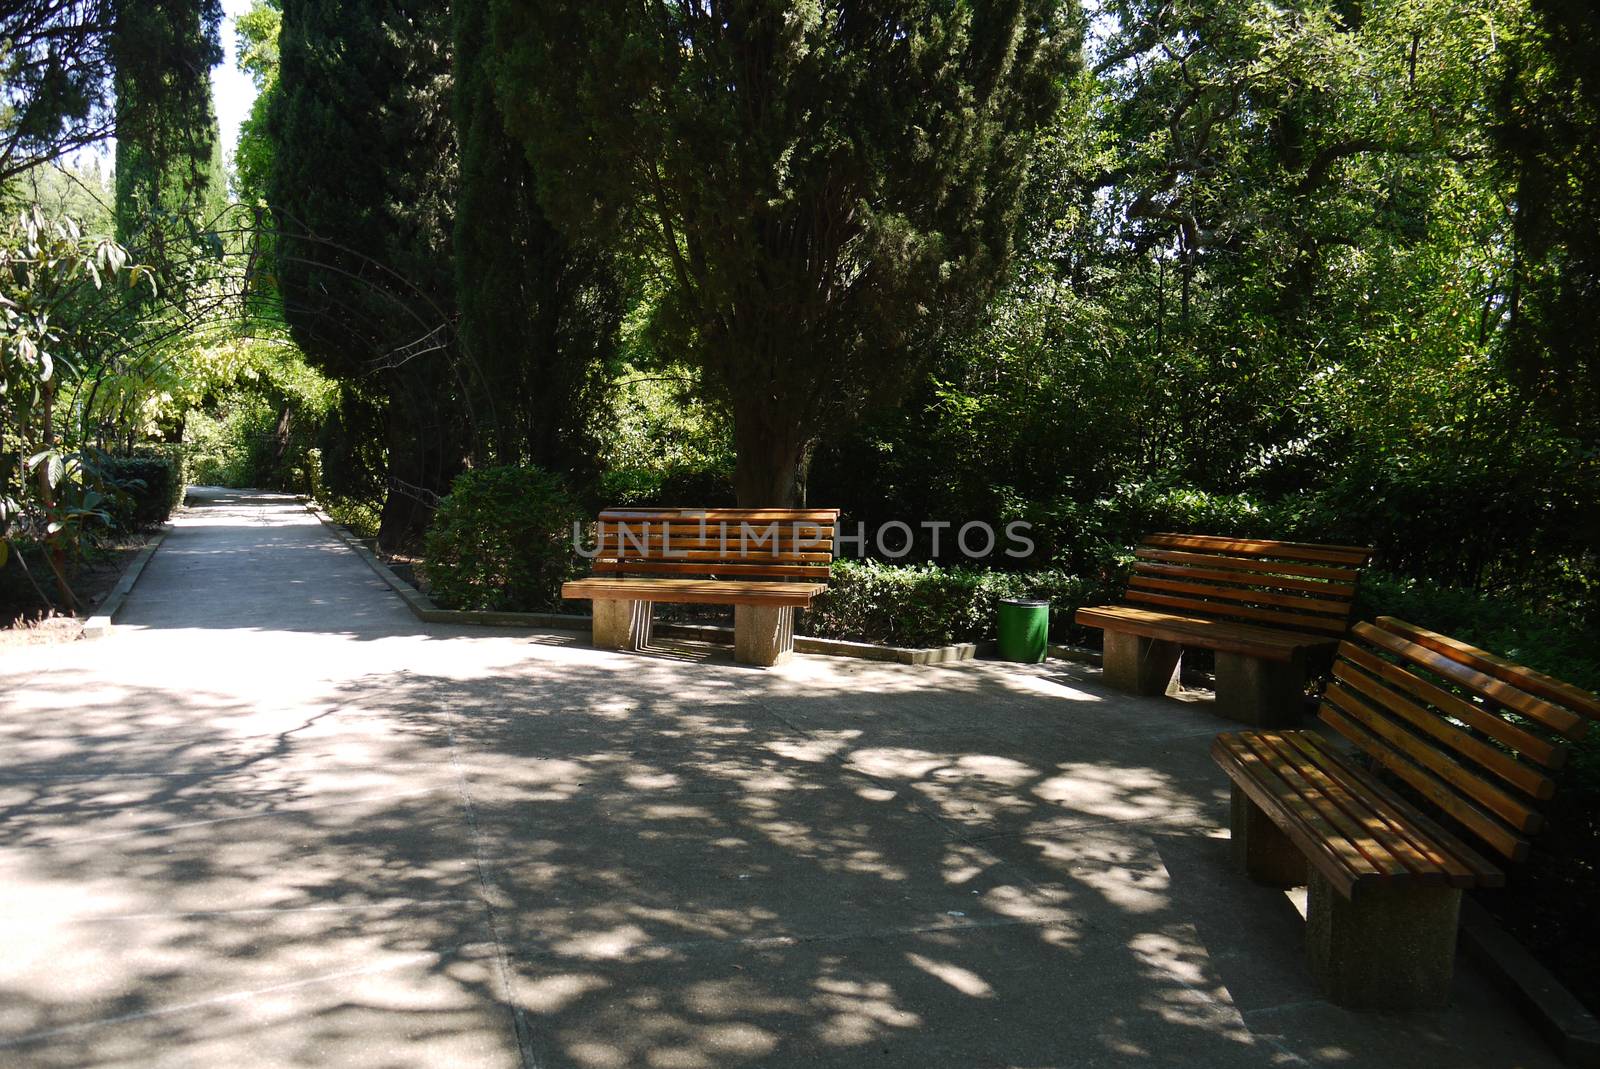 Wooden benches in the park in a cozy picturesque place in the shade of trees next to the path is a good place to relax and unwind from the daily hustle and bustle.